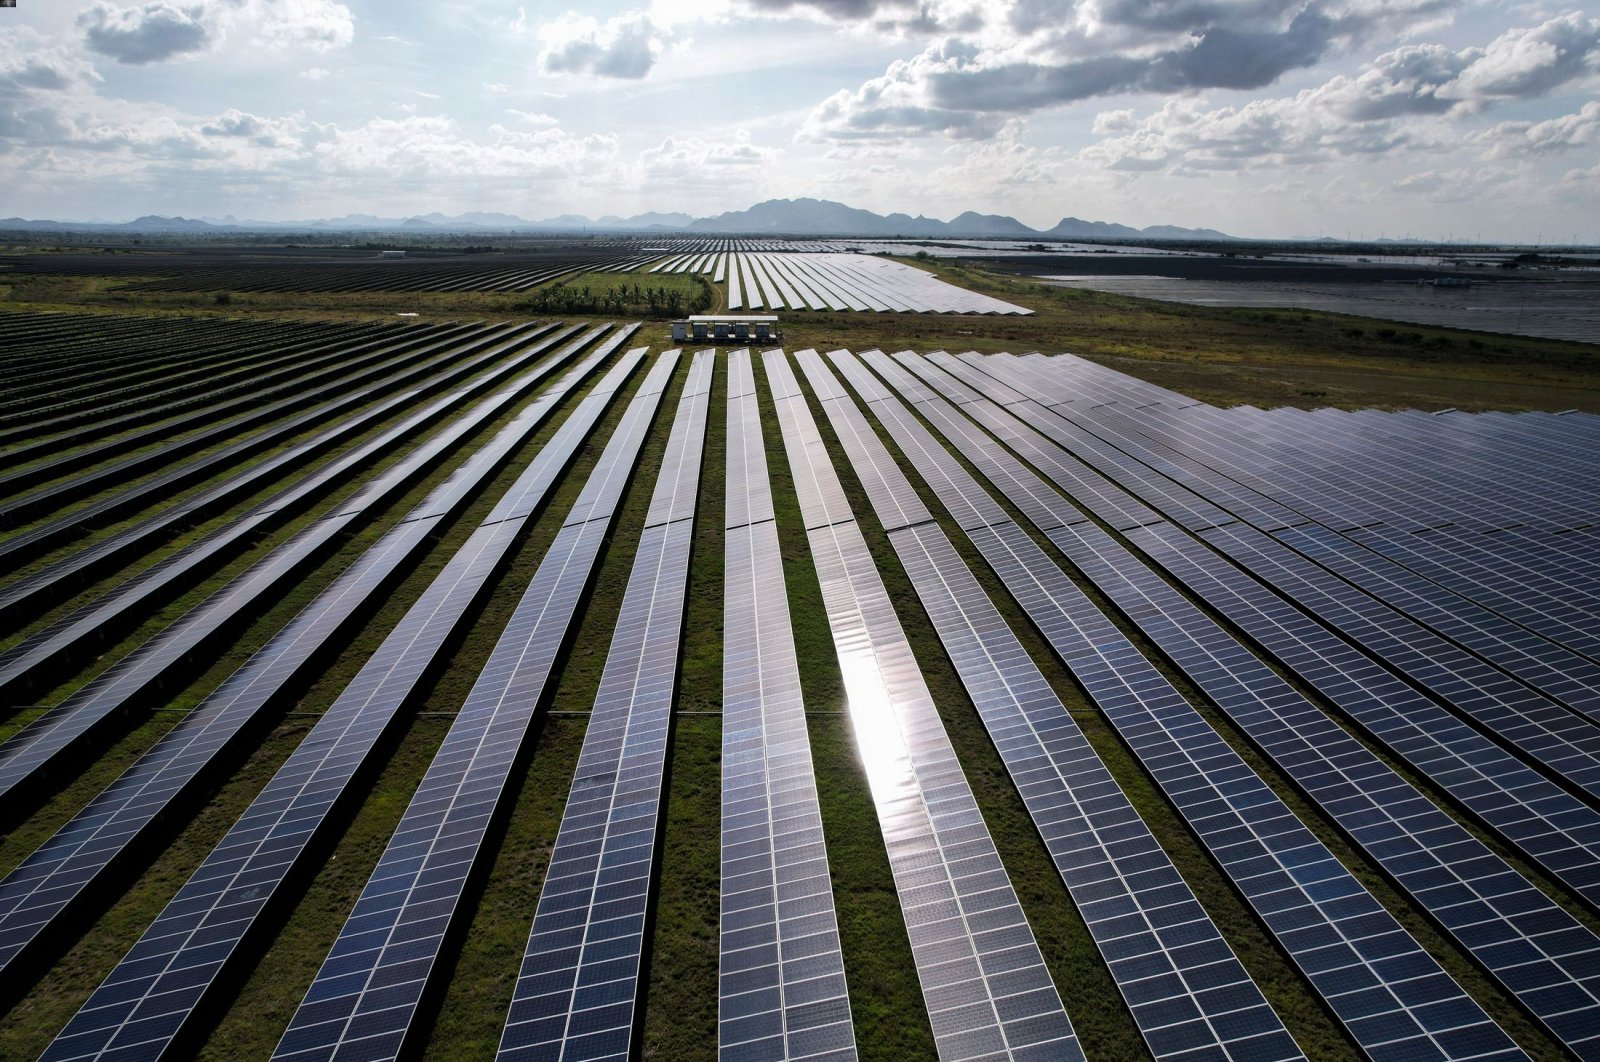 A solar plant in Pavagada Tumkur district, in the southern Indian state of Karnataka, India, Sept. 15, 2022. (AP Photo)